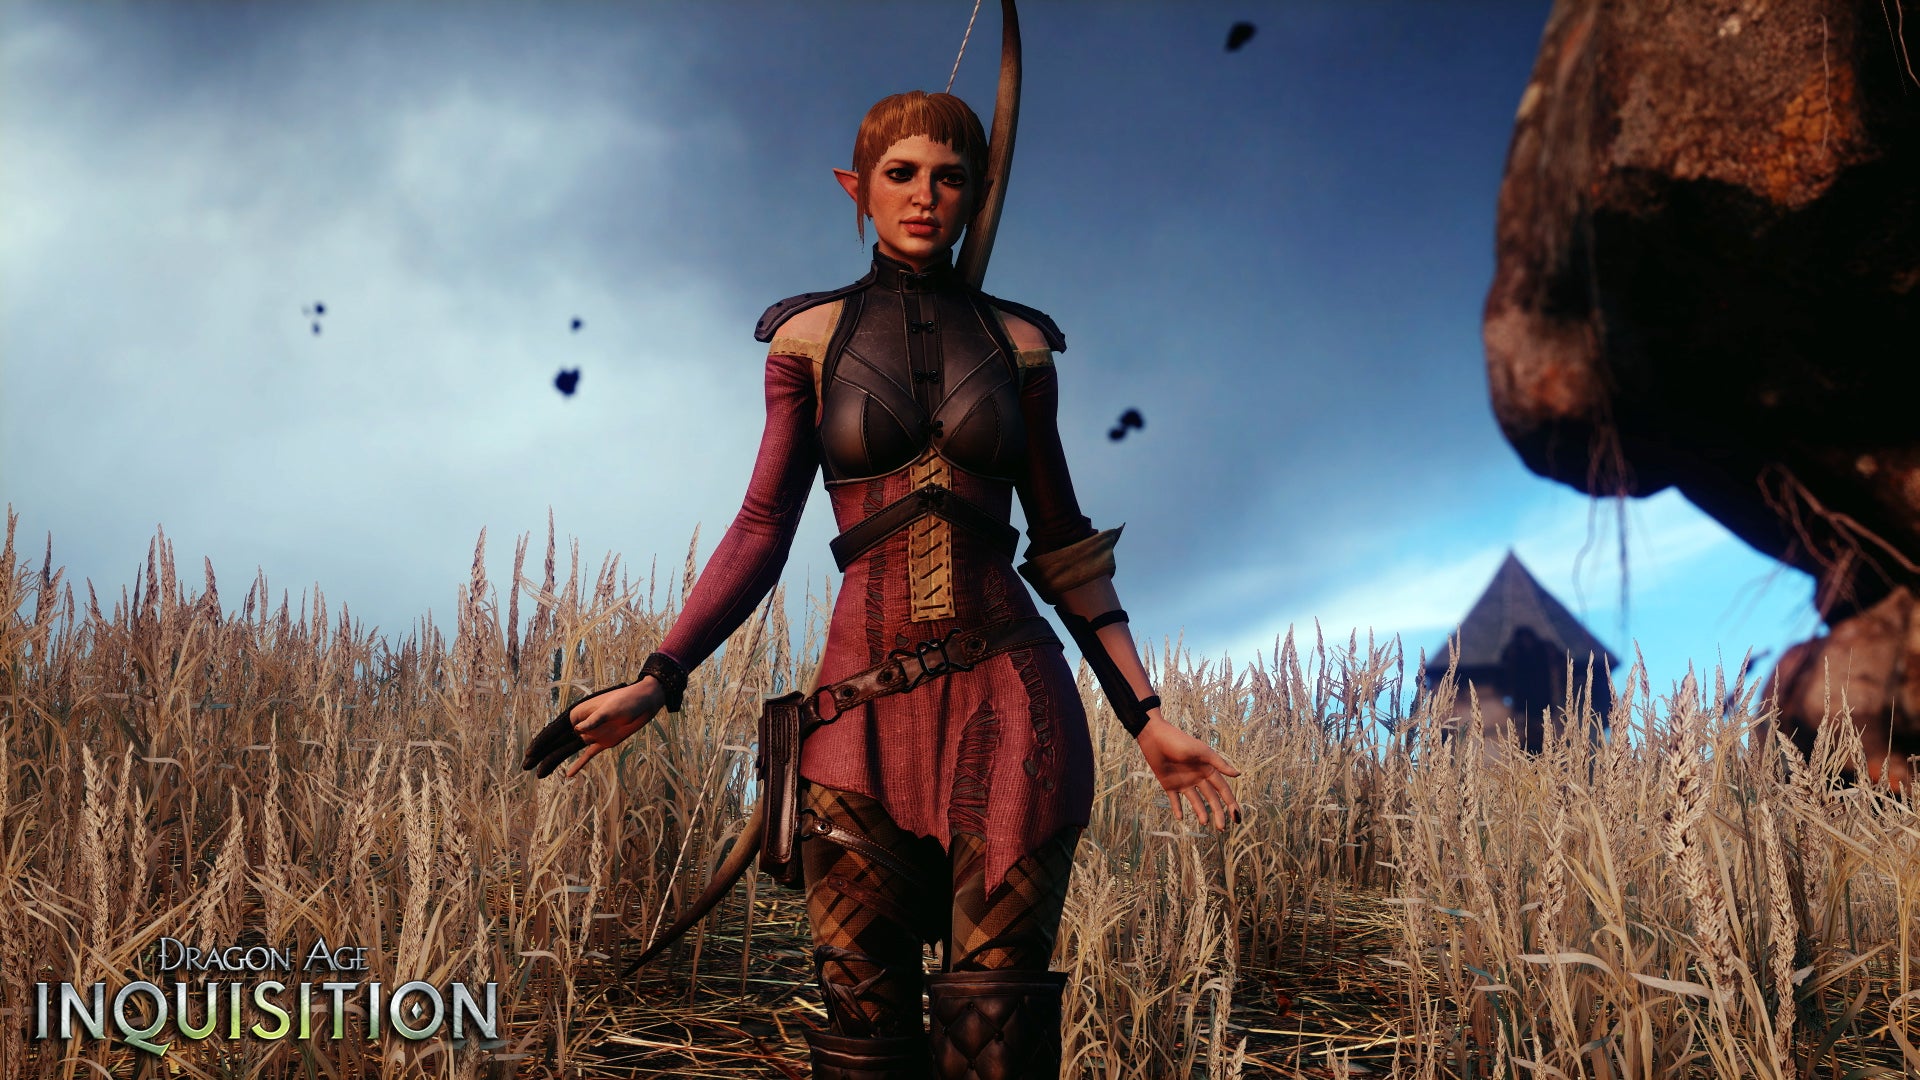 Image for Dragon Age: Inquisition's open world looks incredible in this raw gamepay footage